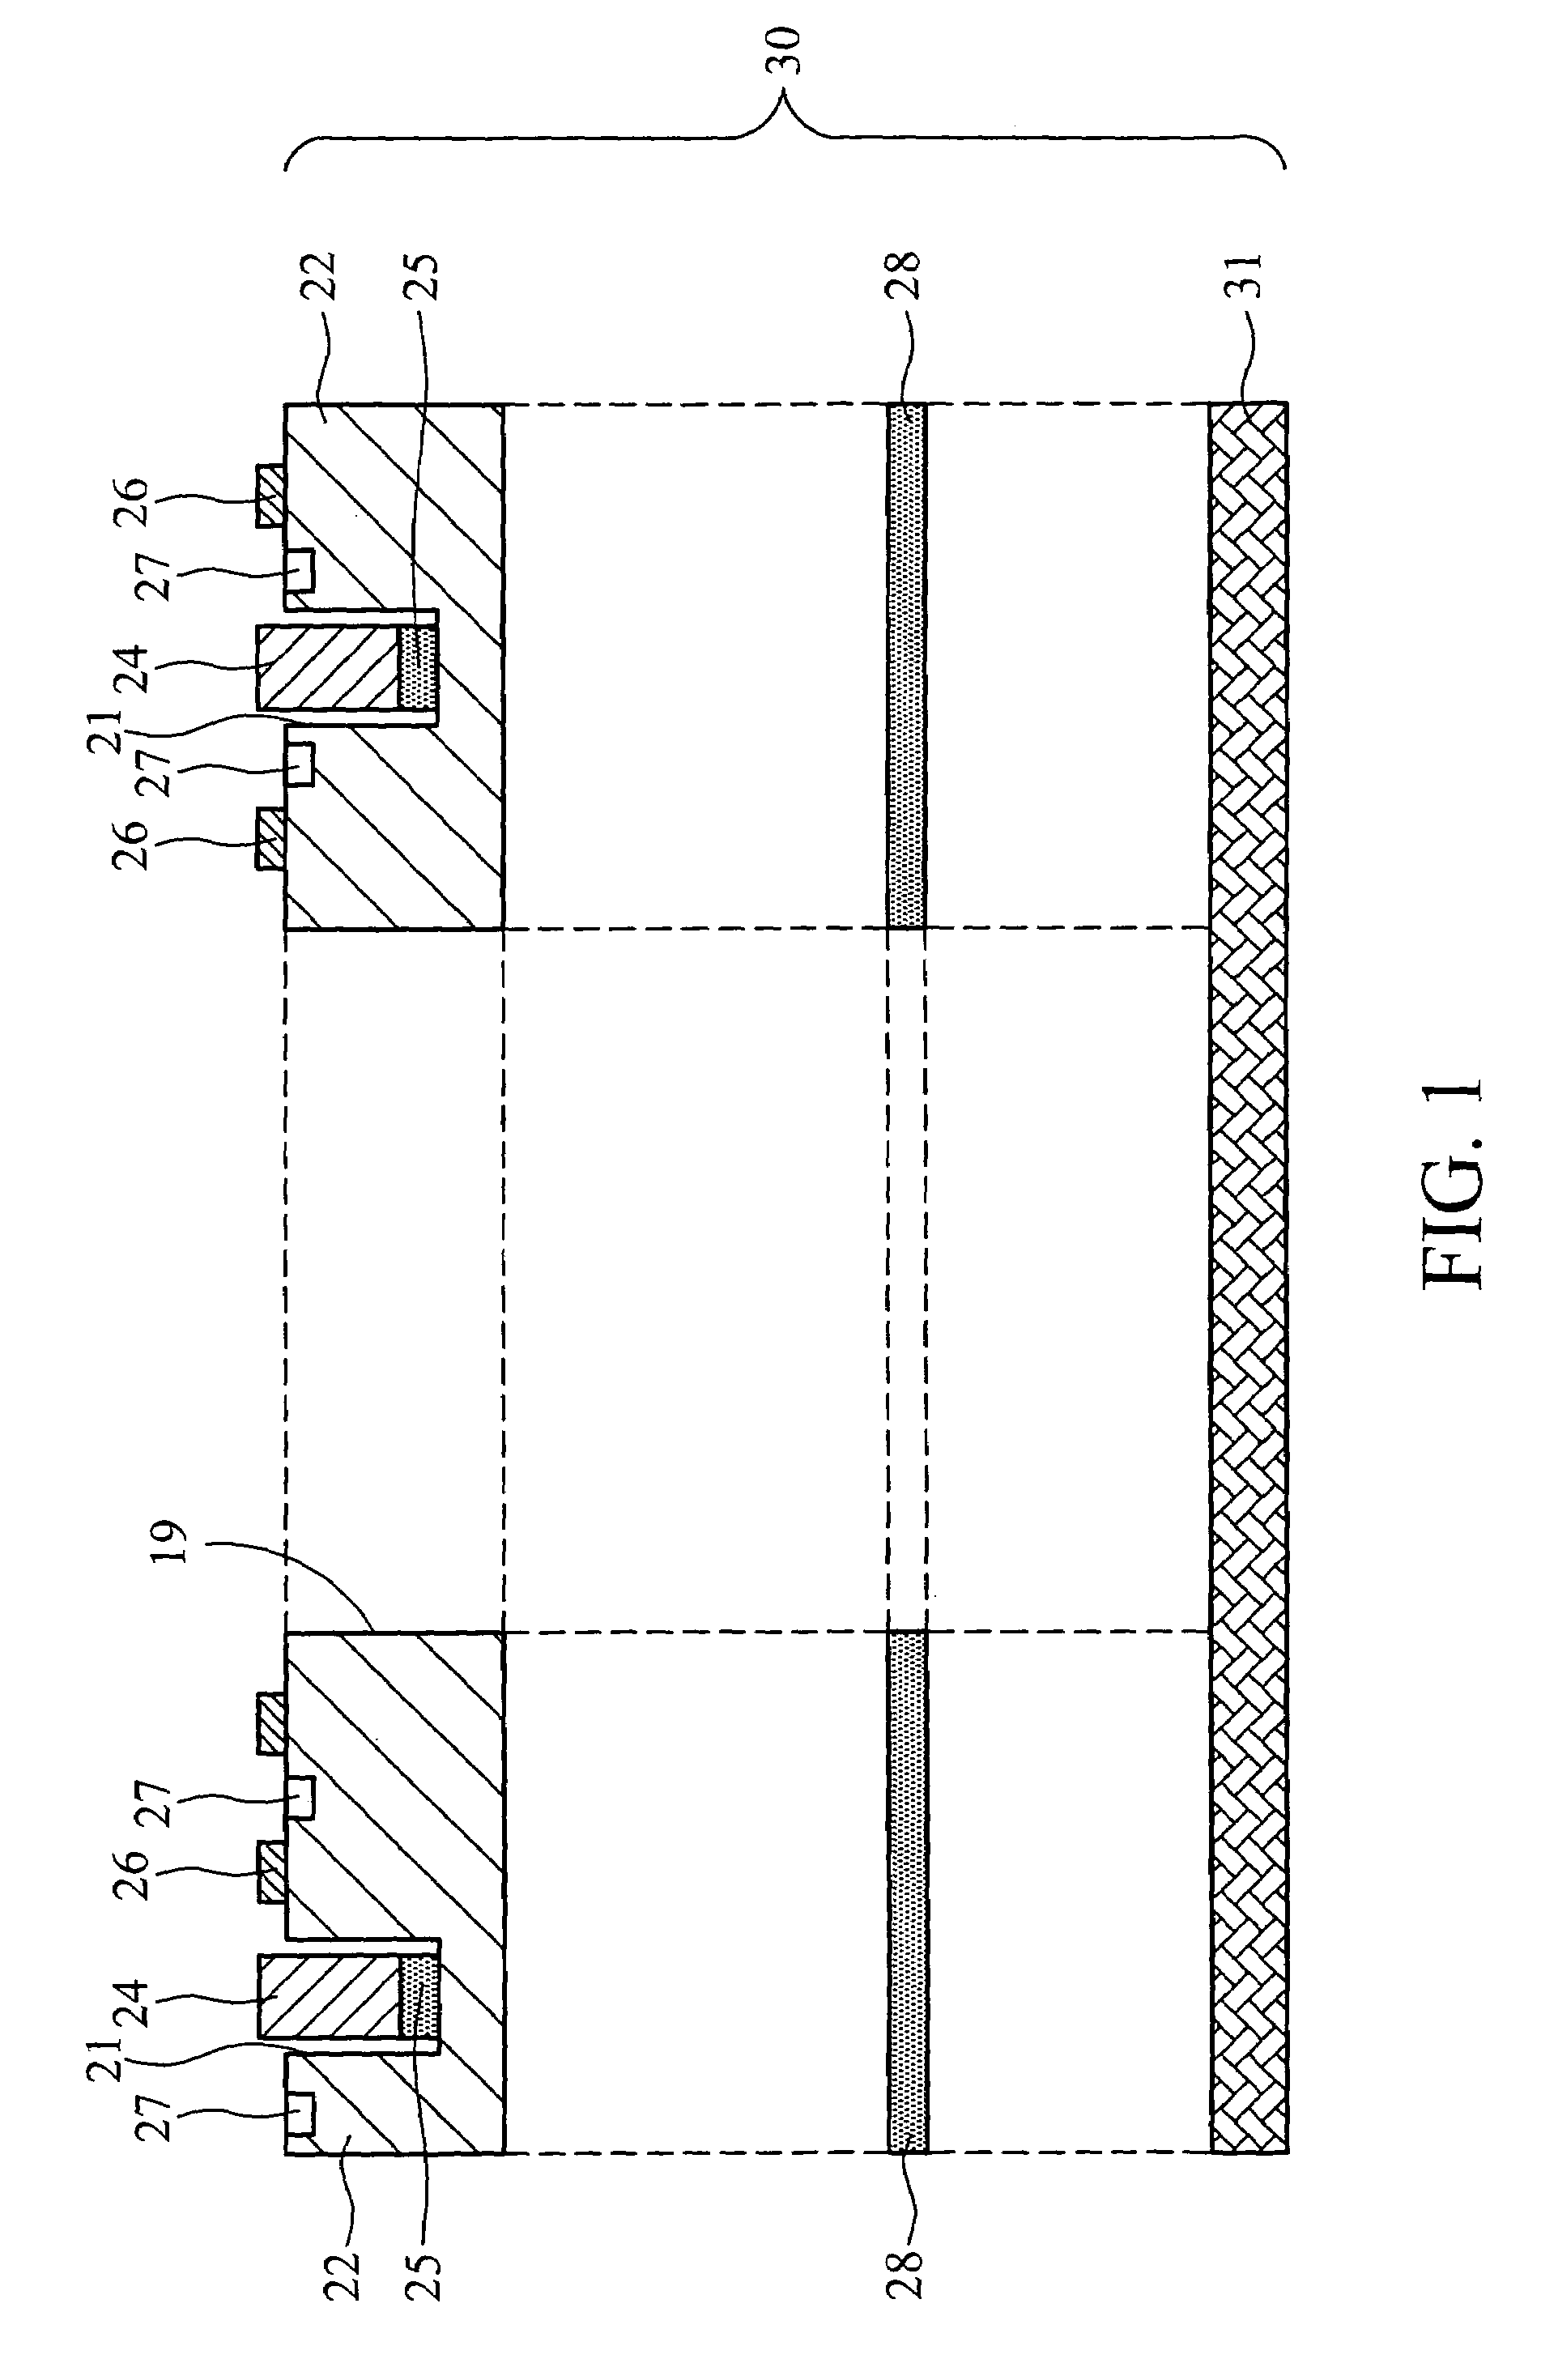 Module board having embedded chips and components and method of forming the same